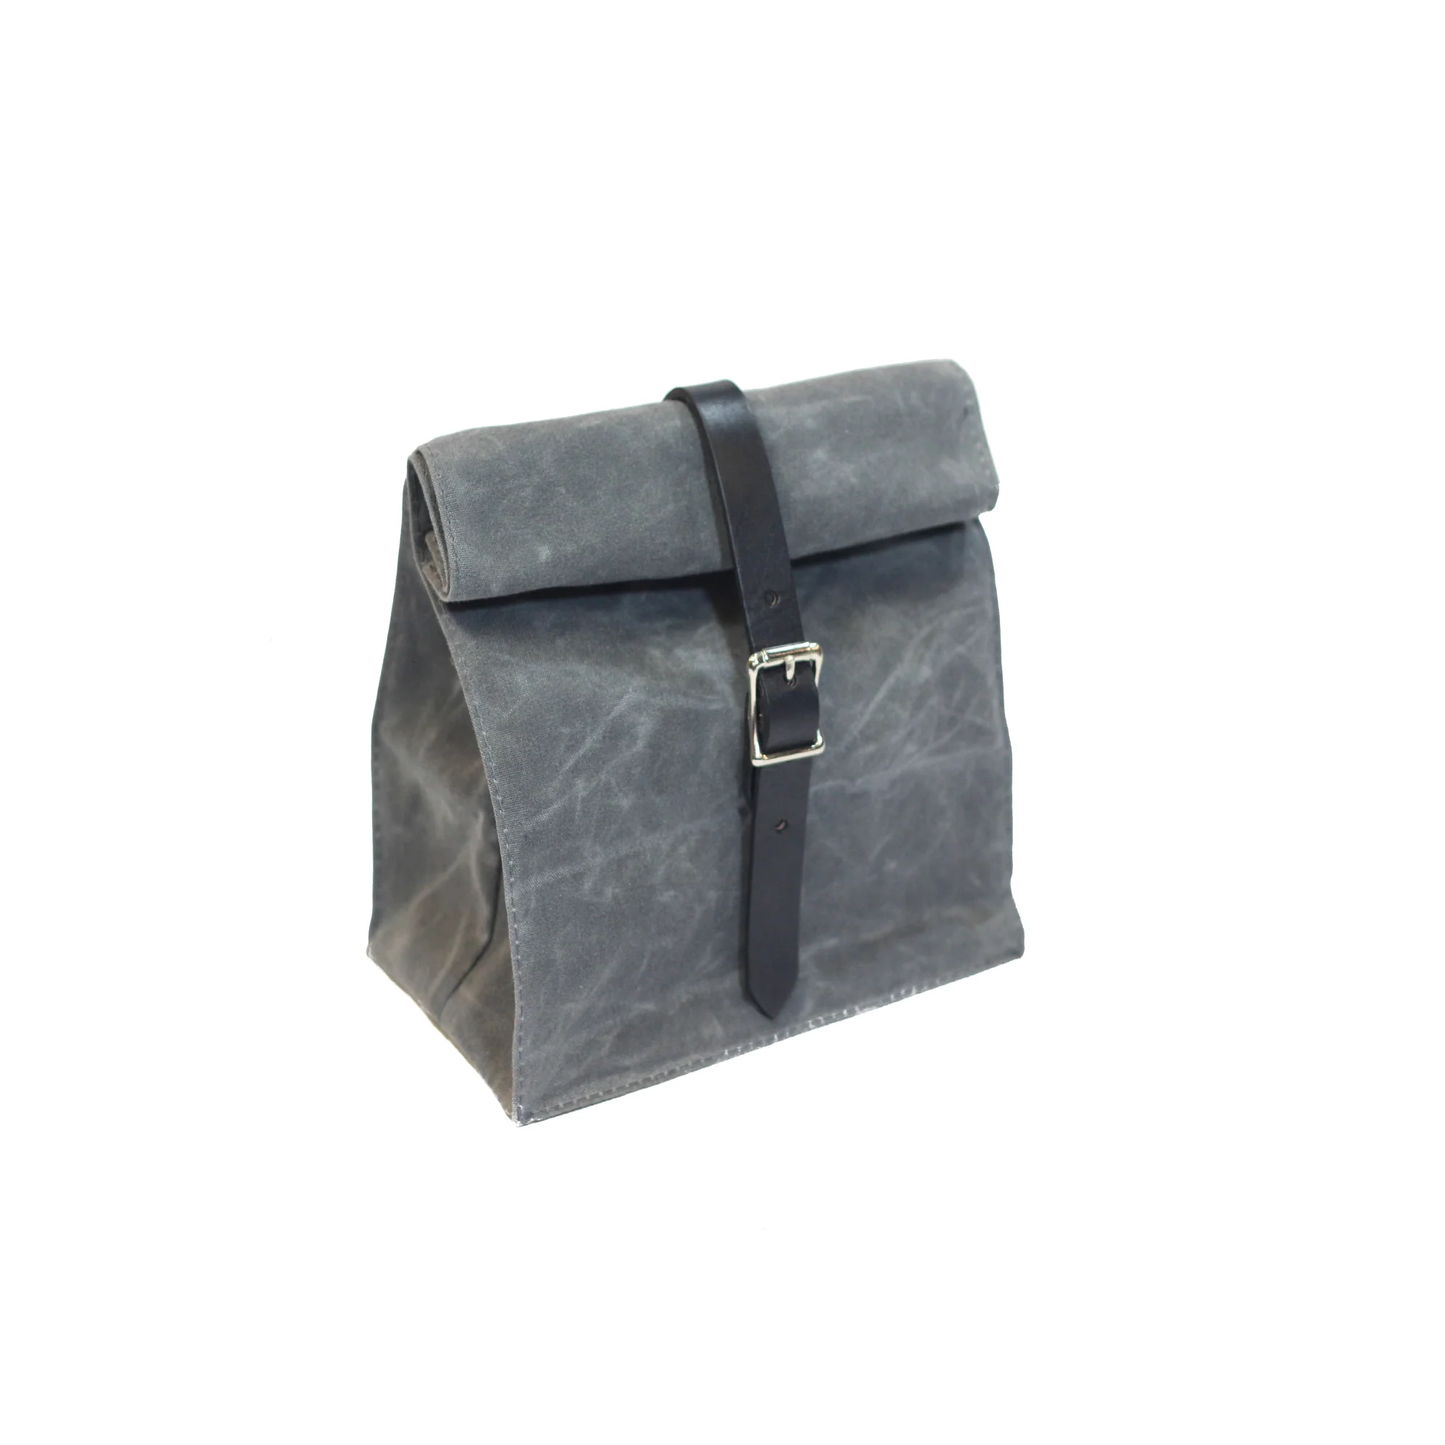 Lunch Tote - Waxed Canvas - Charcoal stock